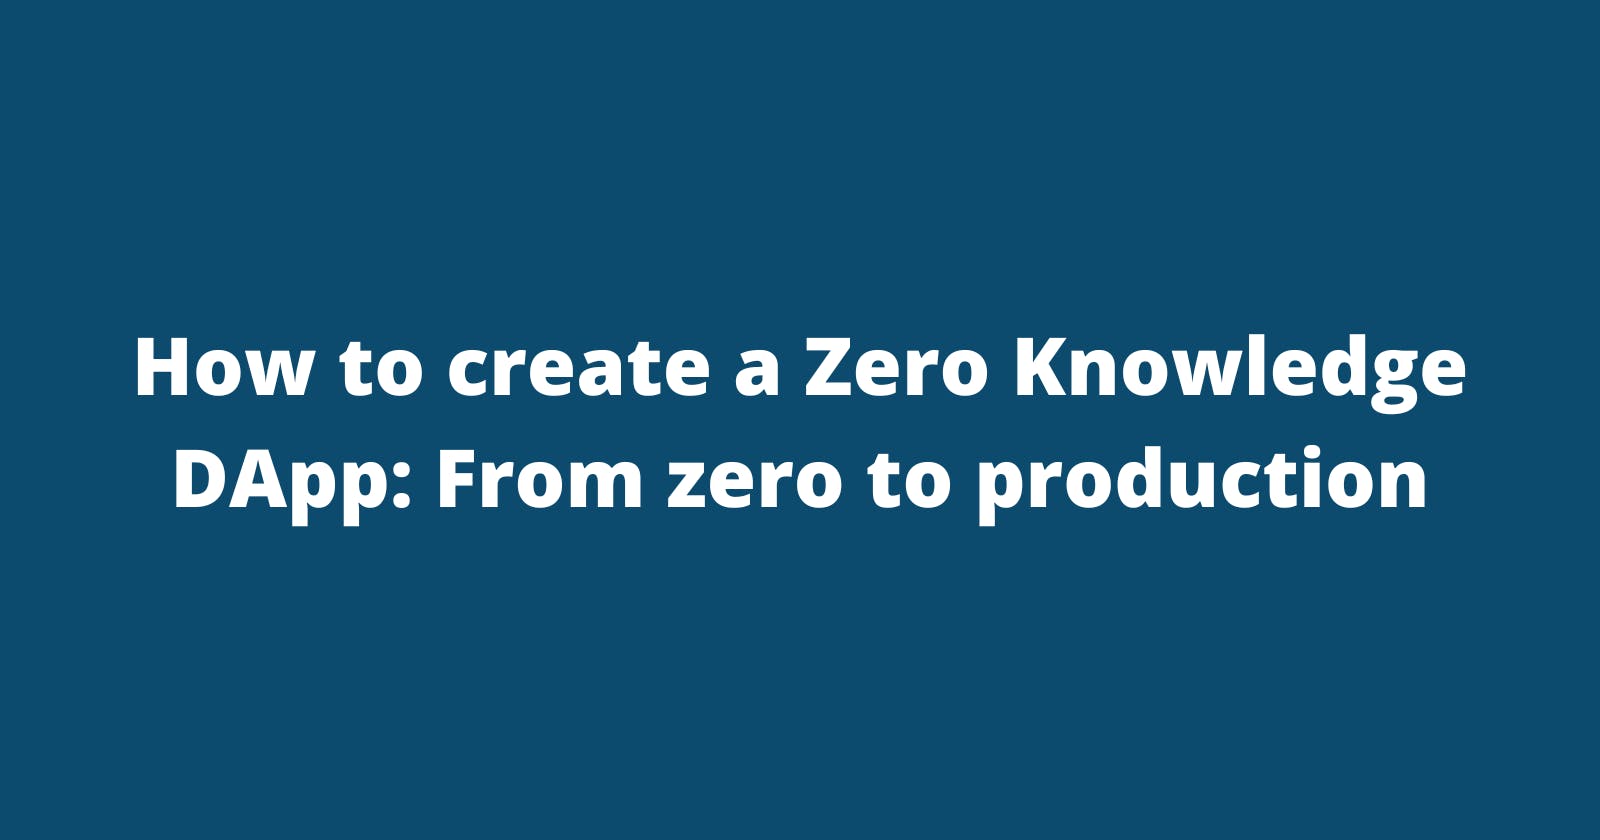 How to create a Zero Knowledge DApp: From zero to production